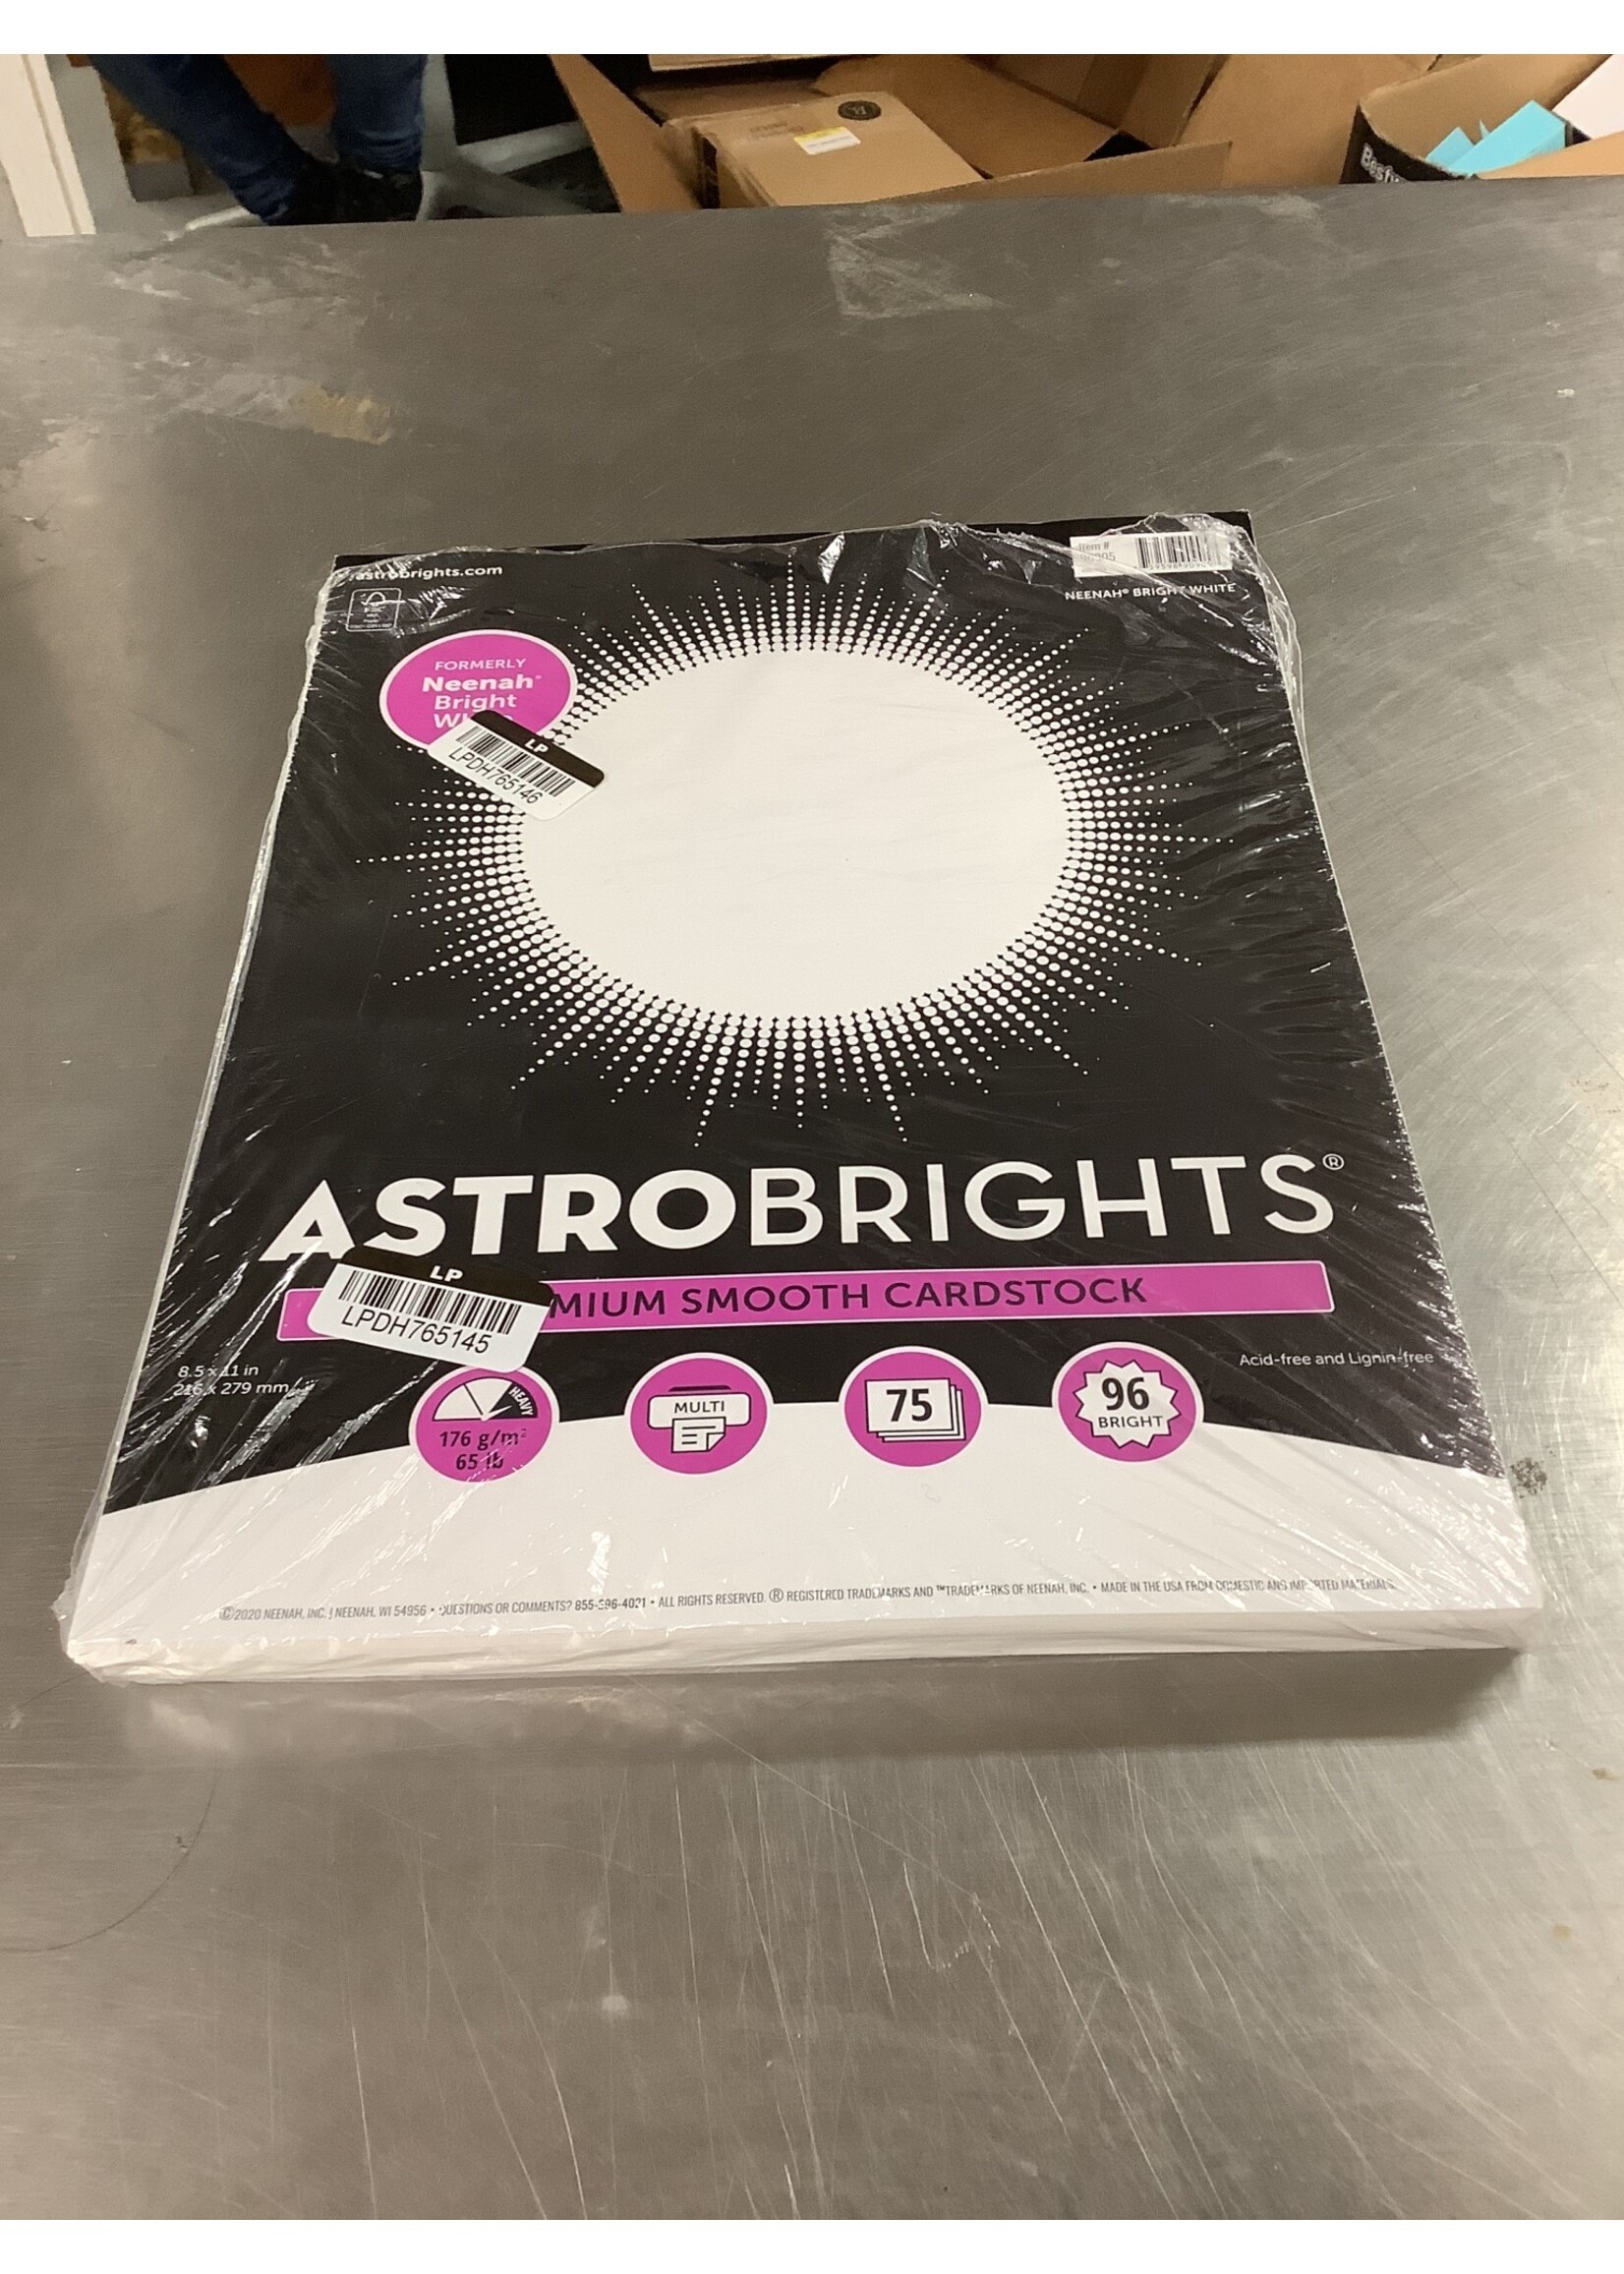 Astrobrights Neenah Cardstock 8.5 x 11 65lb 75ct Bright White - D3